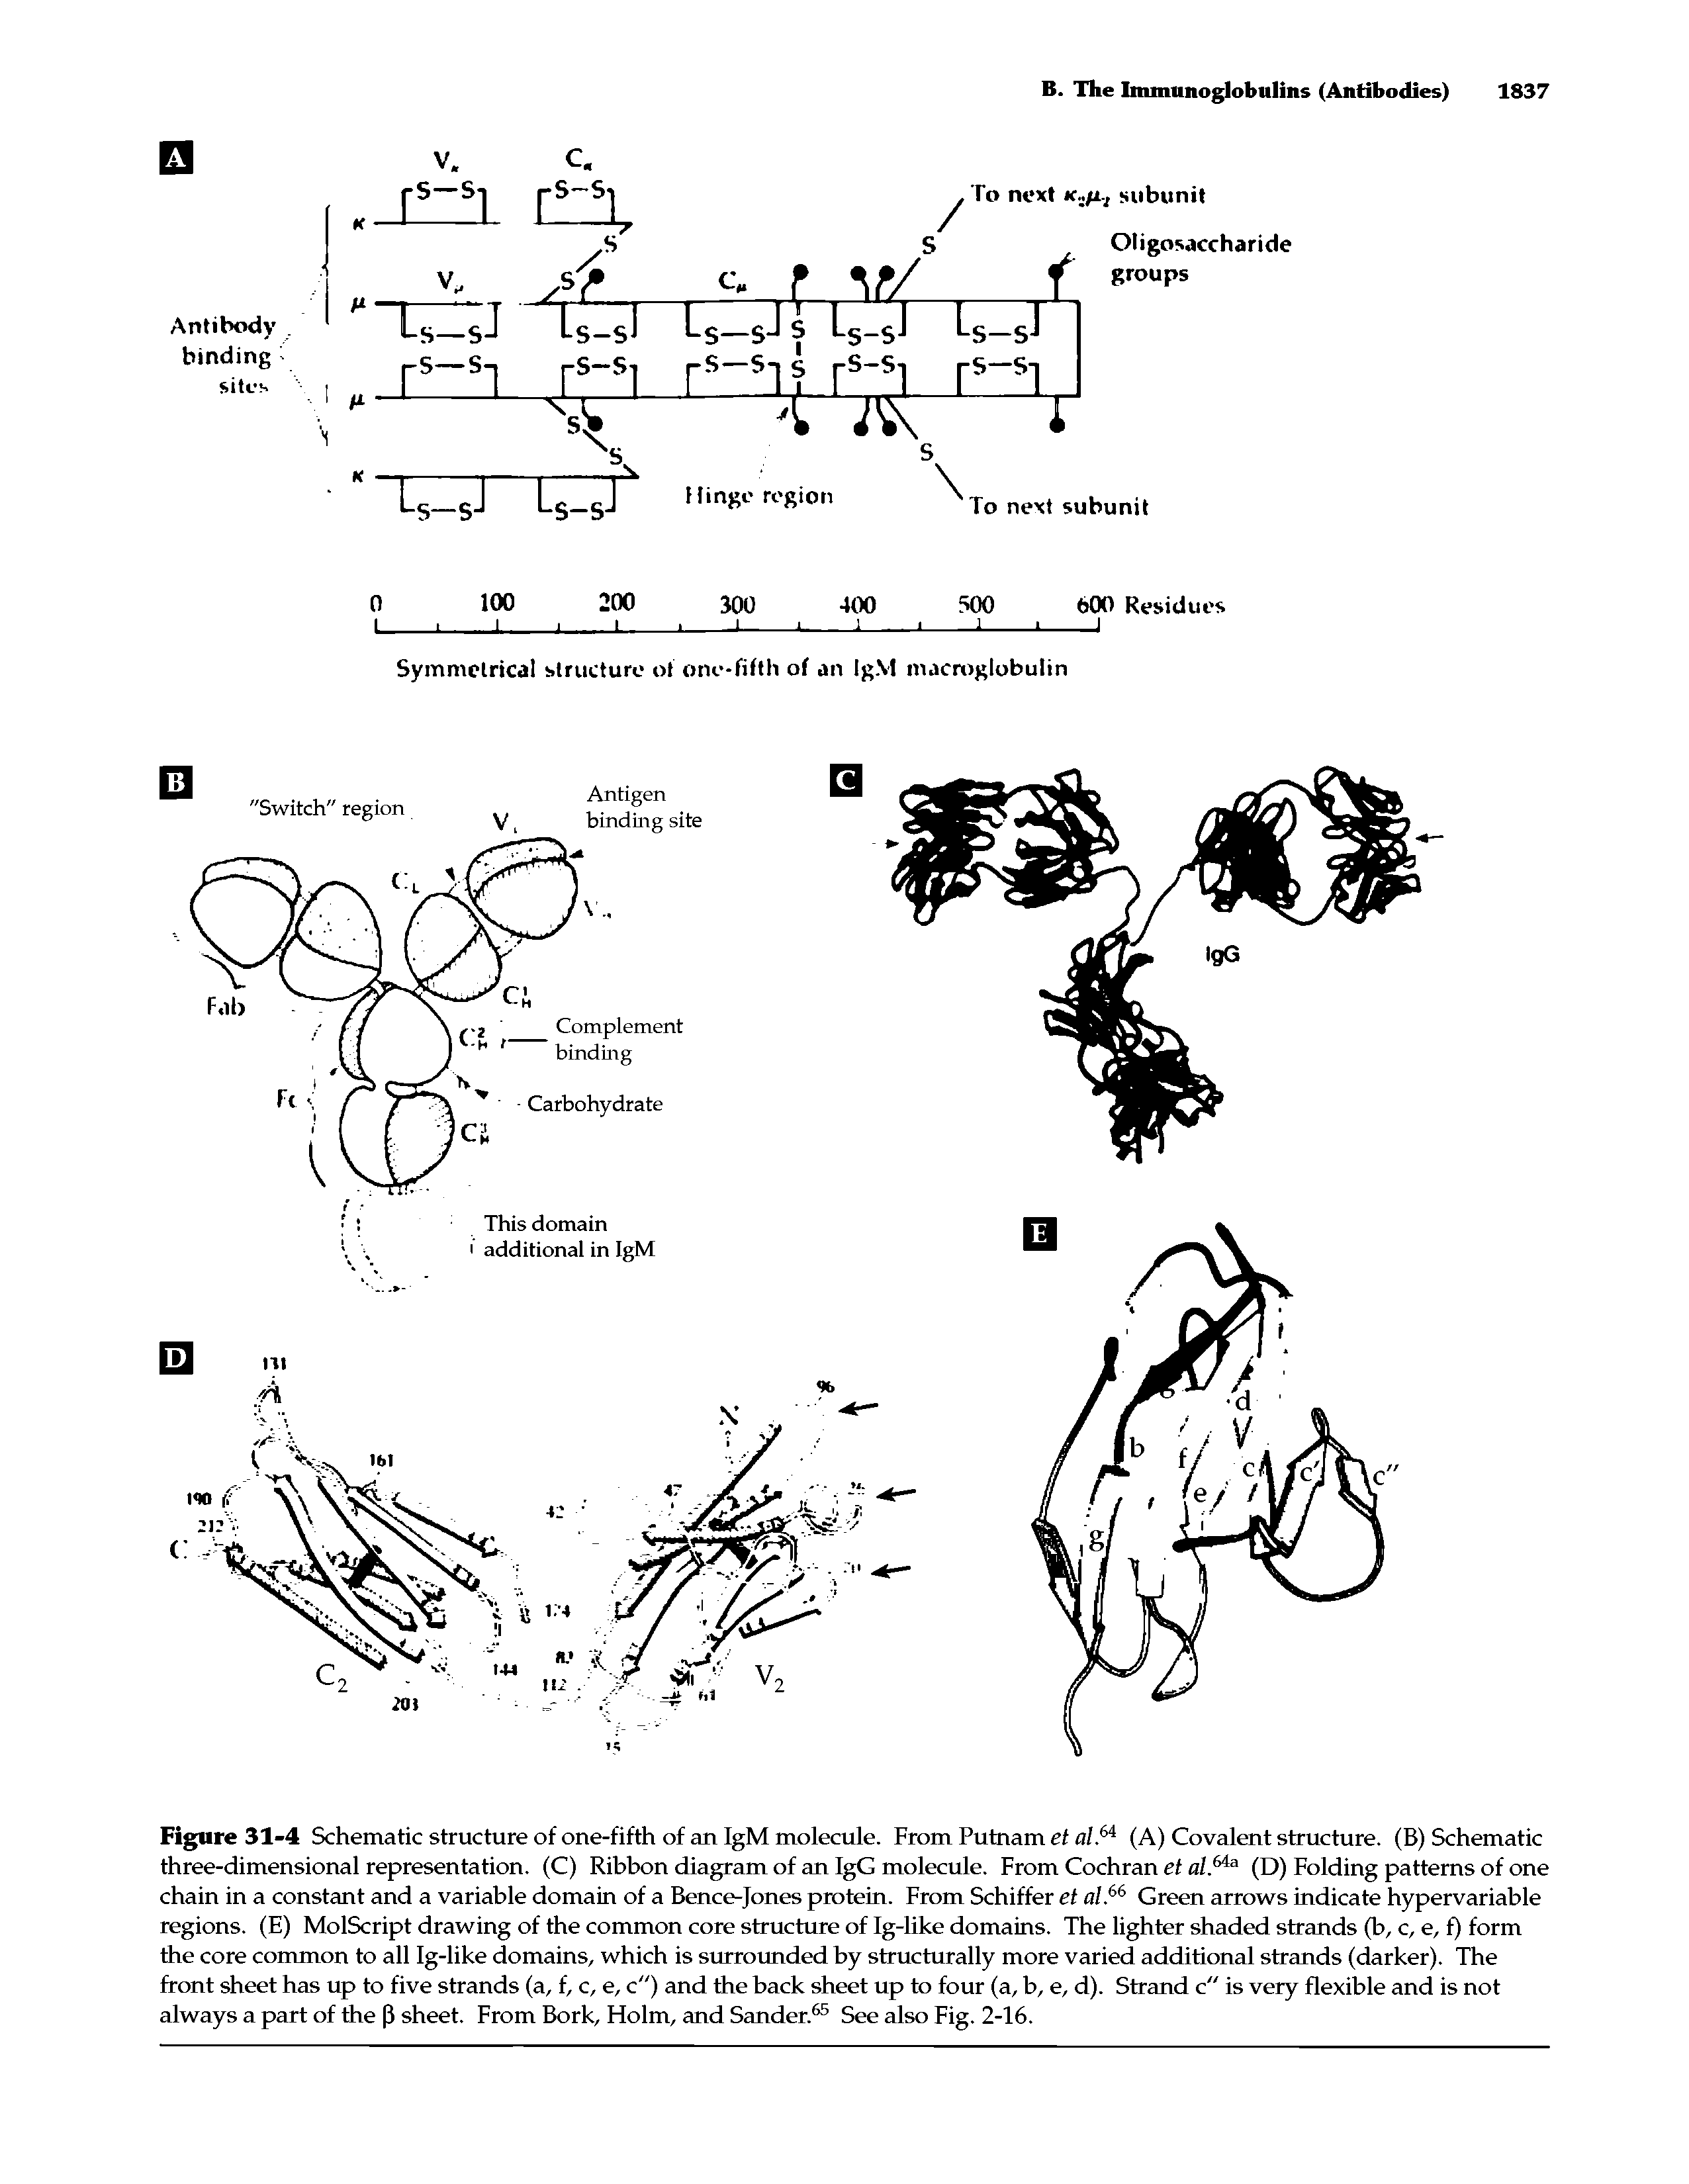 Figure 31-4 Schematic structure of one-fifth of an IgM molecule. From Putnam et al A (A) Covalent structure. (B) Schematic three-dimensional representation. (C) Ribbon diagram of an IgG molecule. From Cochran et al,64a (D) Folding patterns of one chain in a constant and a variable domain of a Bence-Jones protein. From Schiffer et al.66 Green arrows indicate hypervariable regions. (E) MolScript drawing of the common core structure of Ig-like domains. The lighter shaded strands (b, c, e, f) form the core common to all Ig-like domains, which is surrounded by structurally more varied additional strands (darker). The front sheet has up to five strands (a, f, c, e, c") and the back sheet up to four (a, b, e, d). Strand c" is very flexible and is not always a part of the (3 sheet. From Bork, Holm, and Sander.65 See also Fig. 2-16.